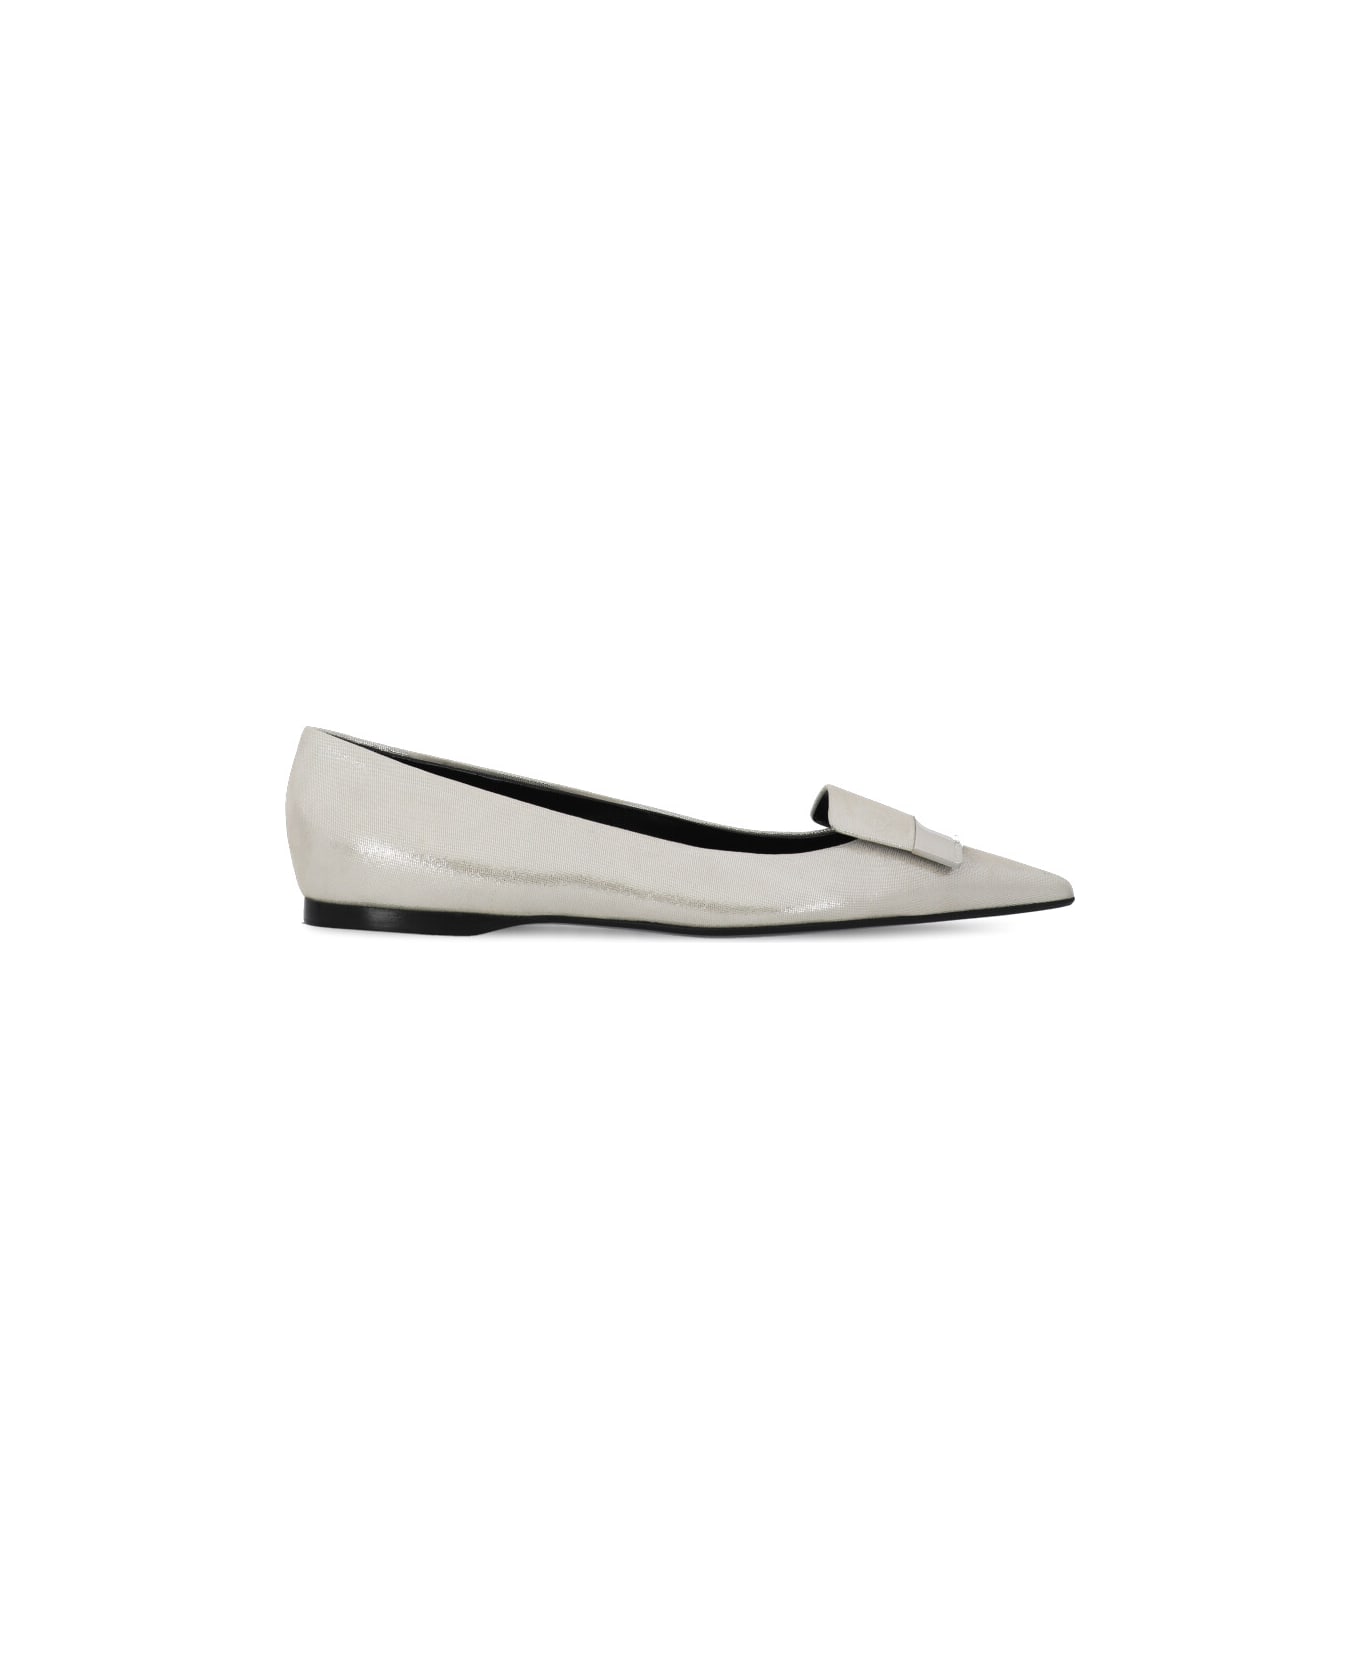 Sergio Rossi Leather Ballet Shoes - Silver